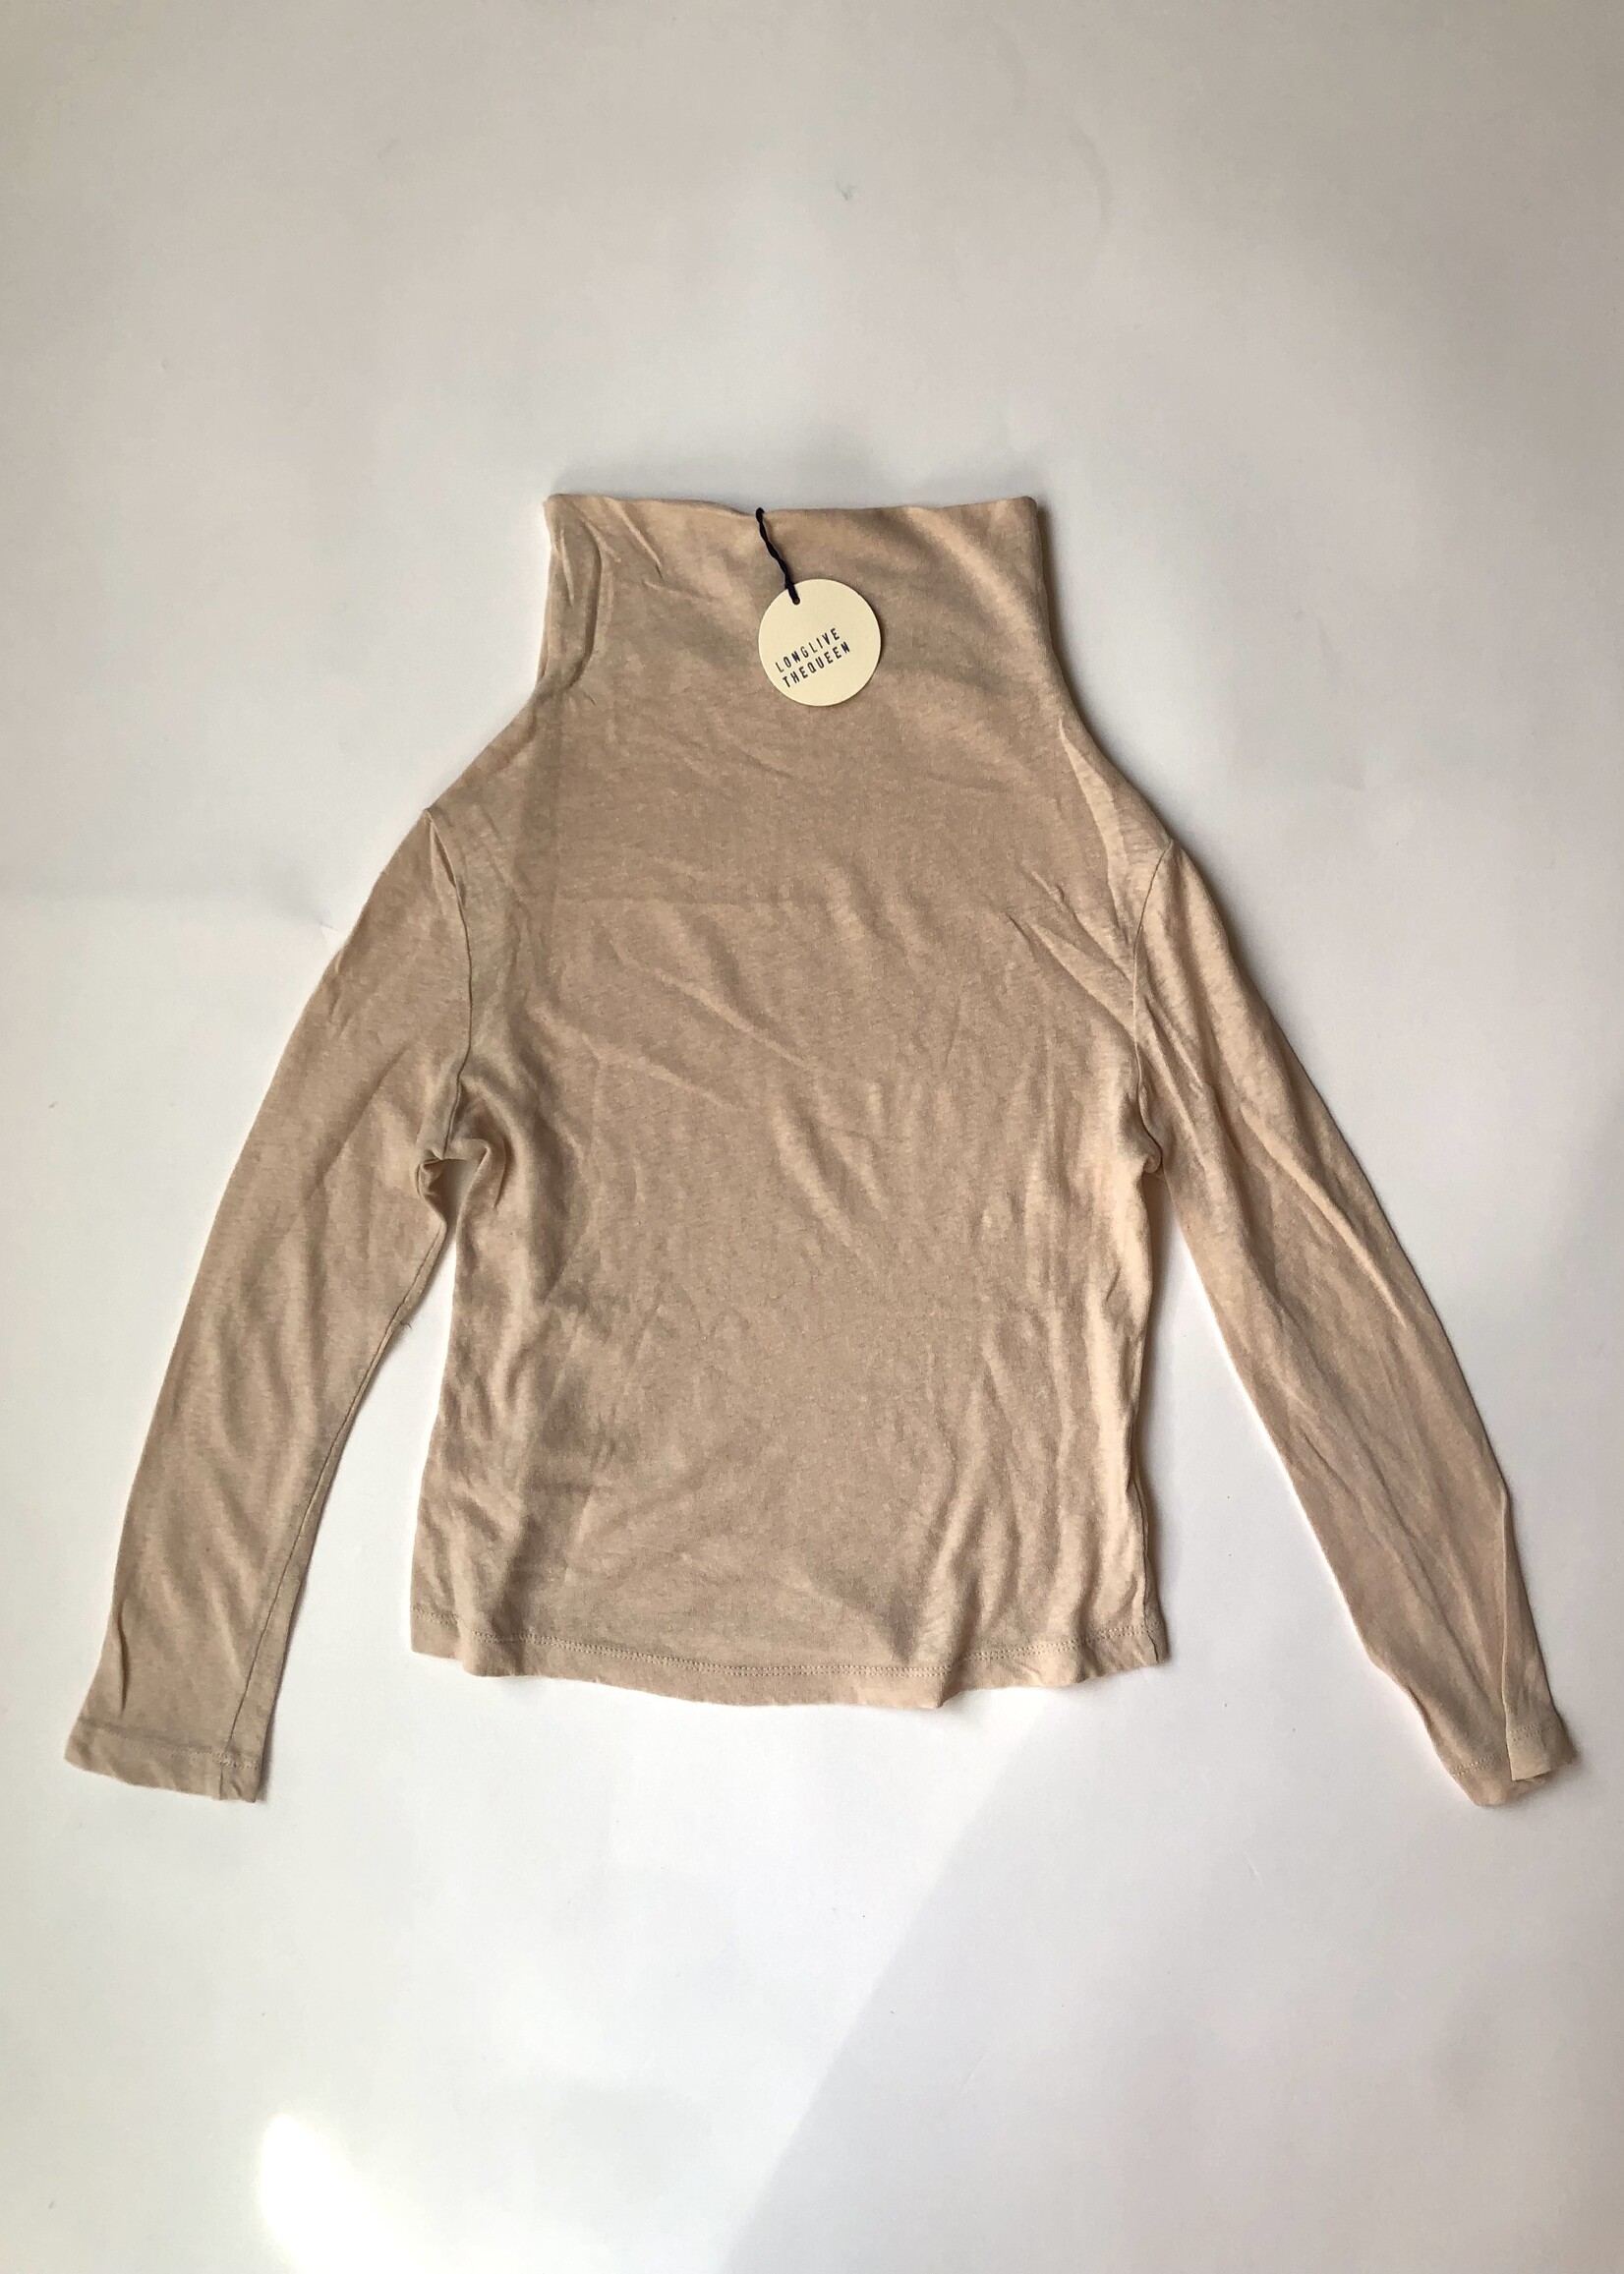 Long Live The Queen Creme turtle neck longsleeve 4-6y